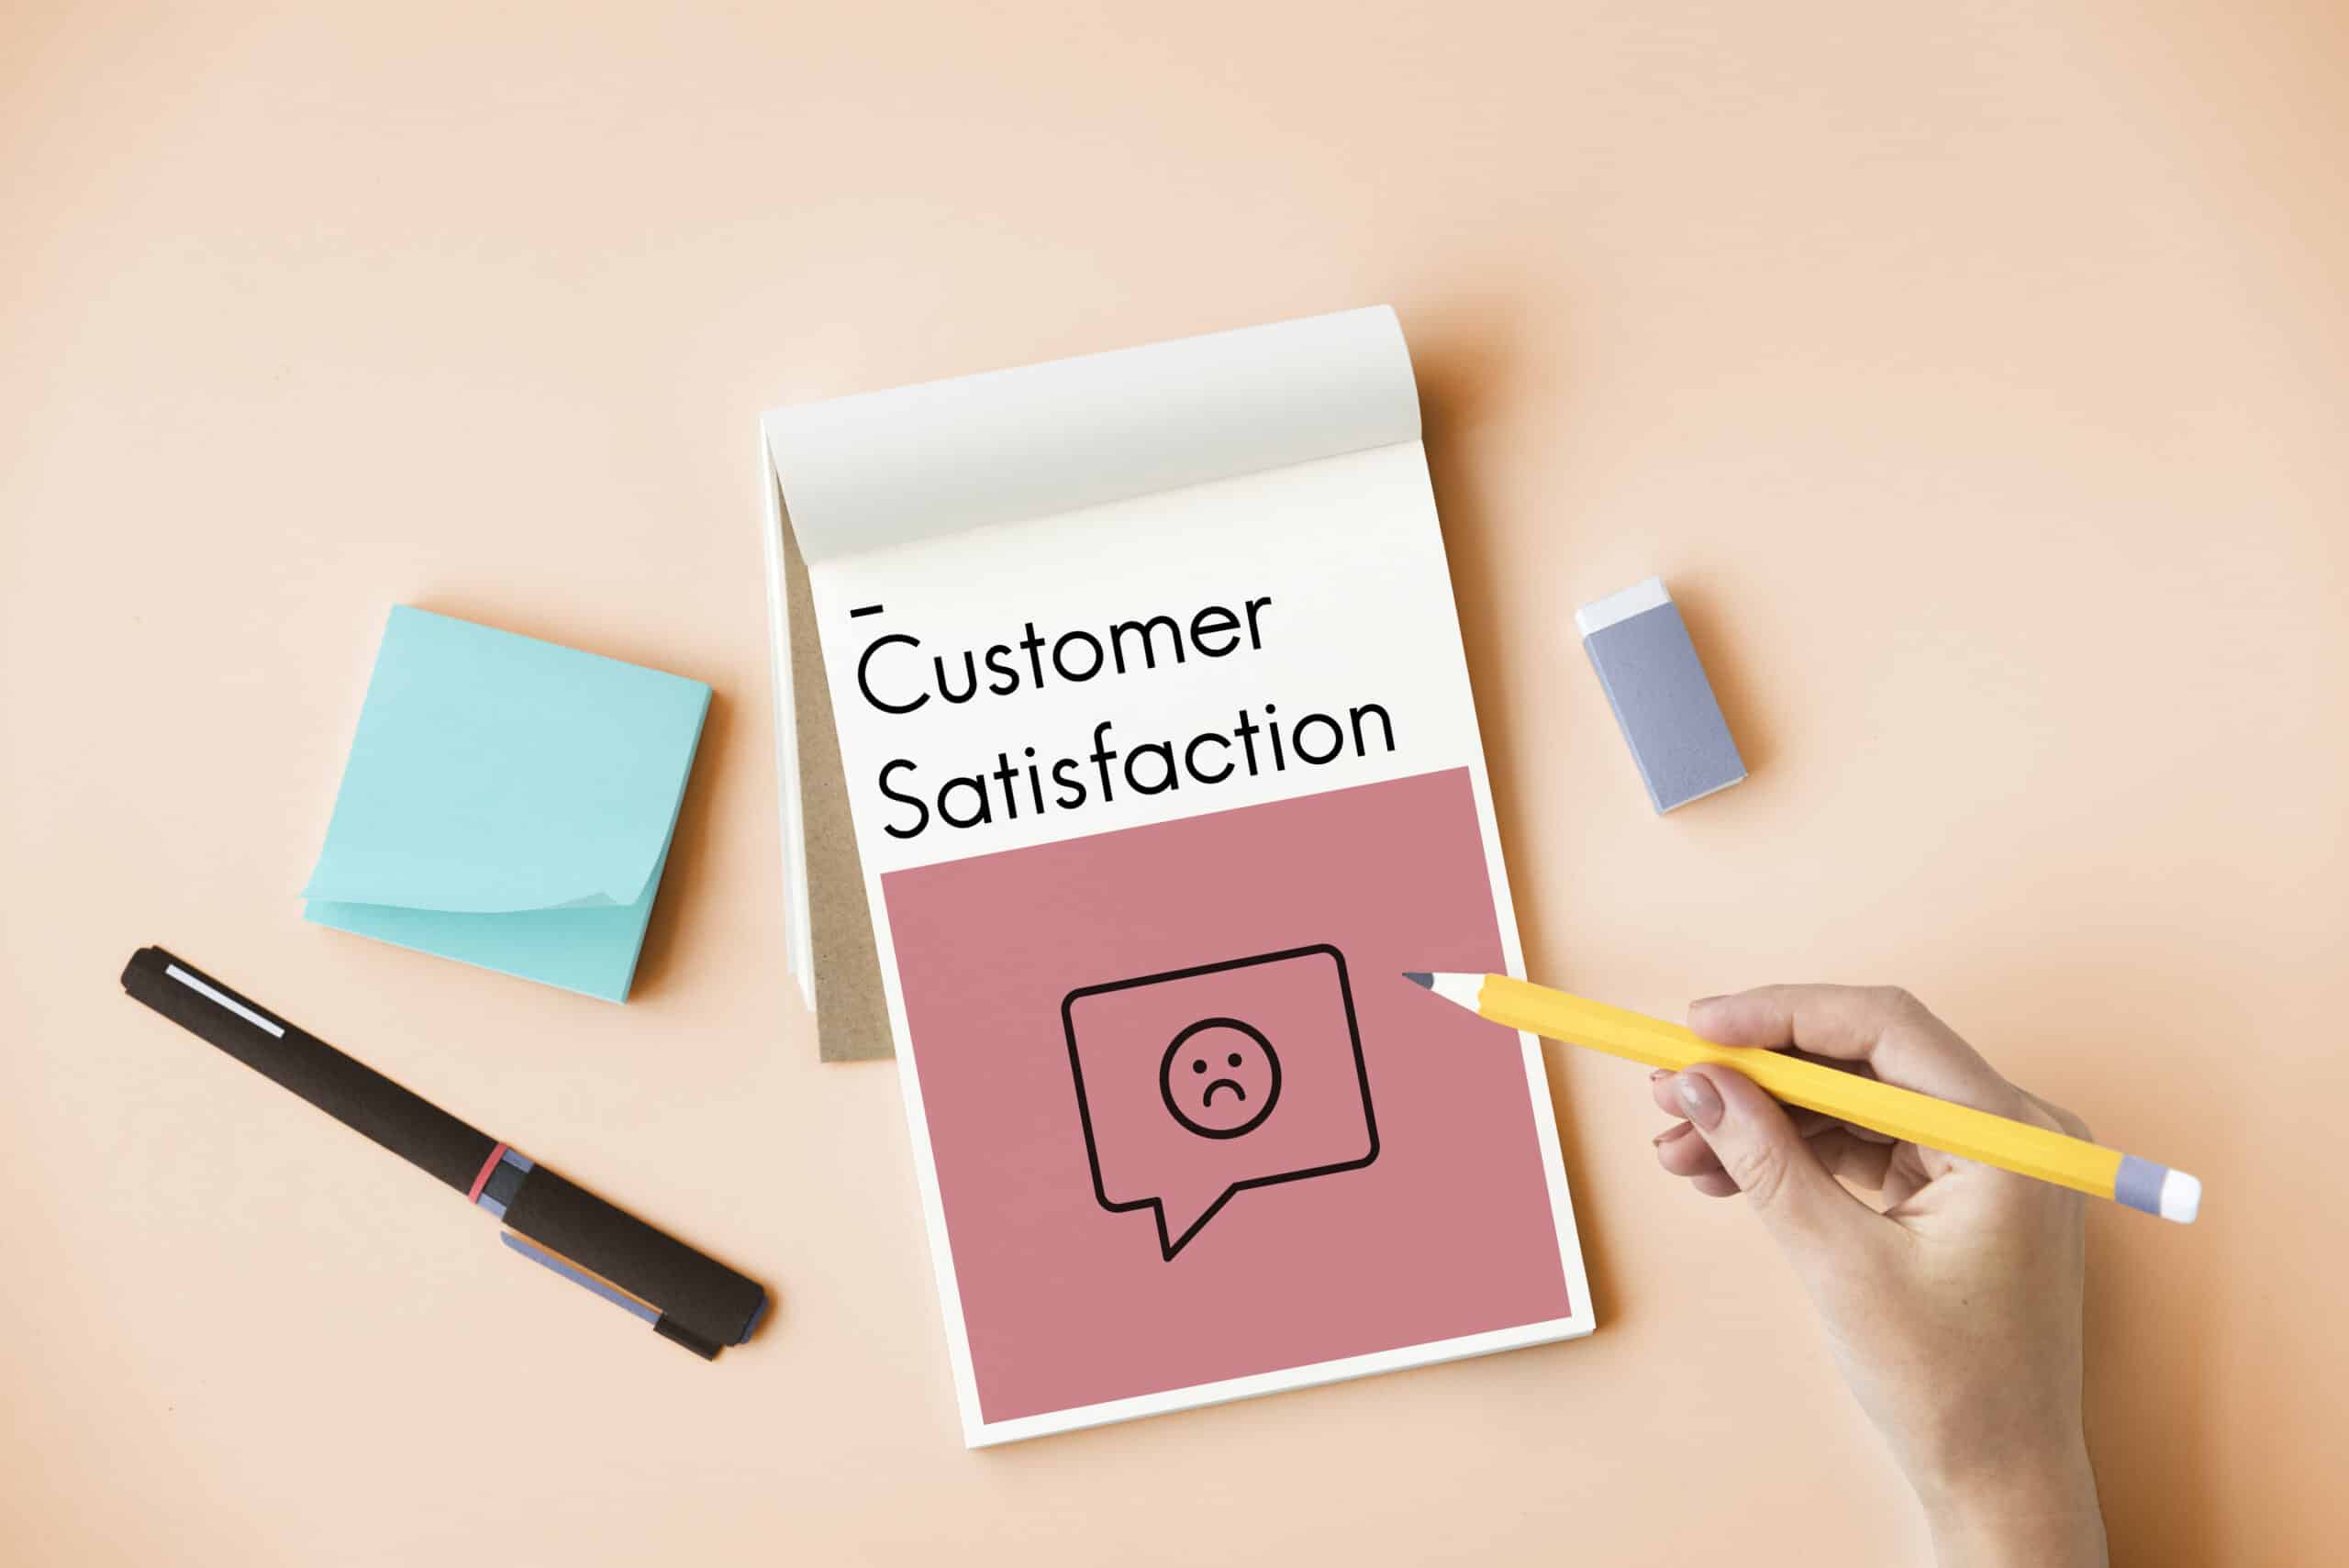 The relationship between resolving claims and customer satisfaction